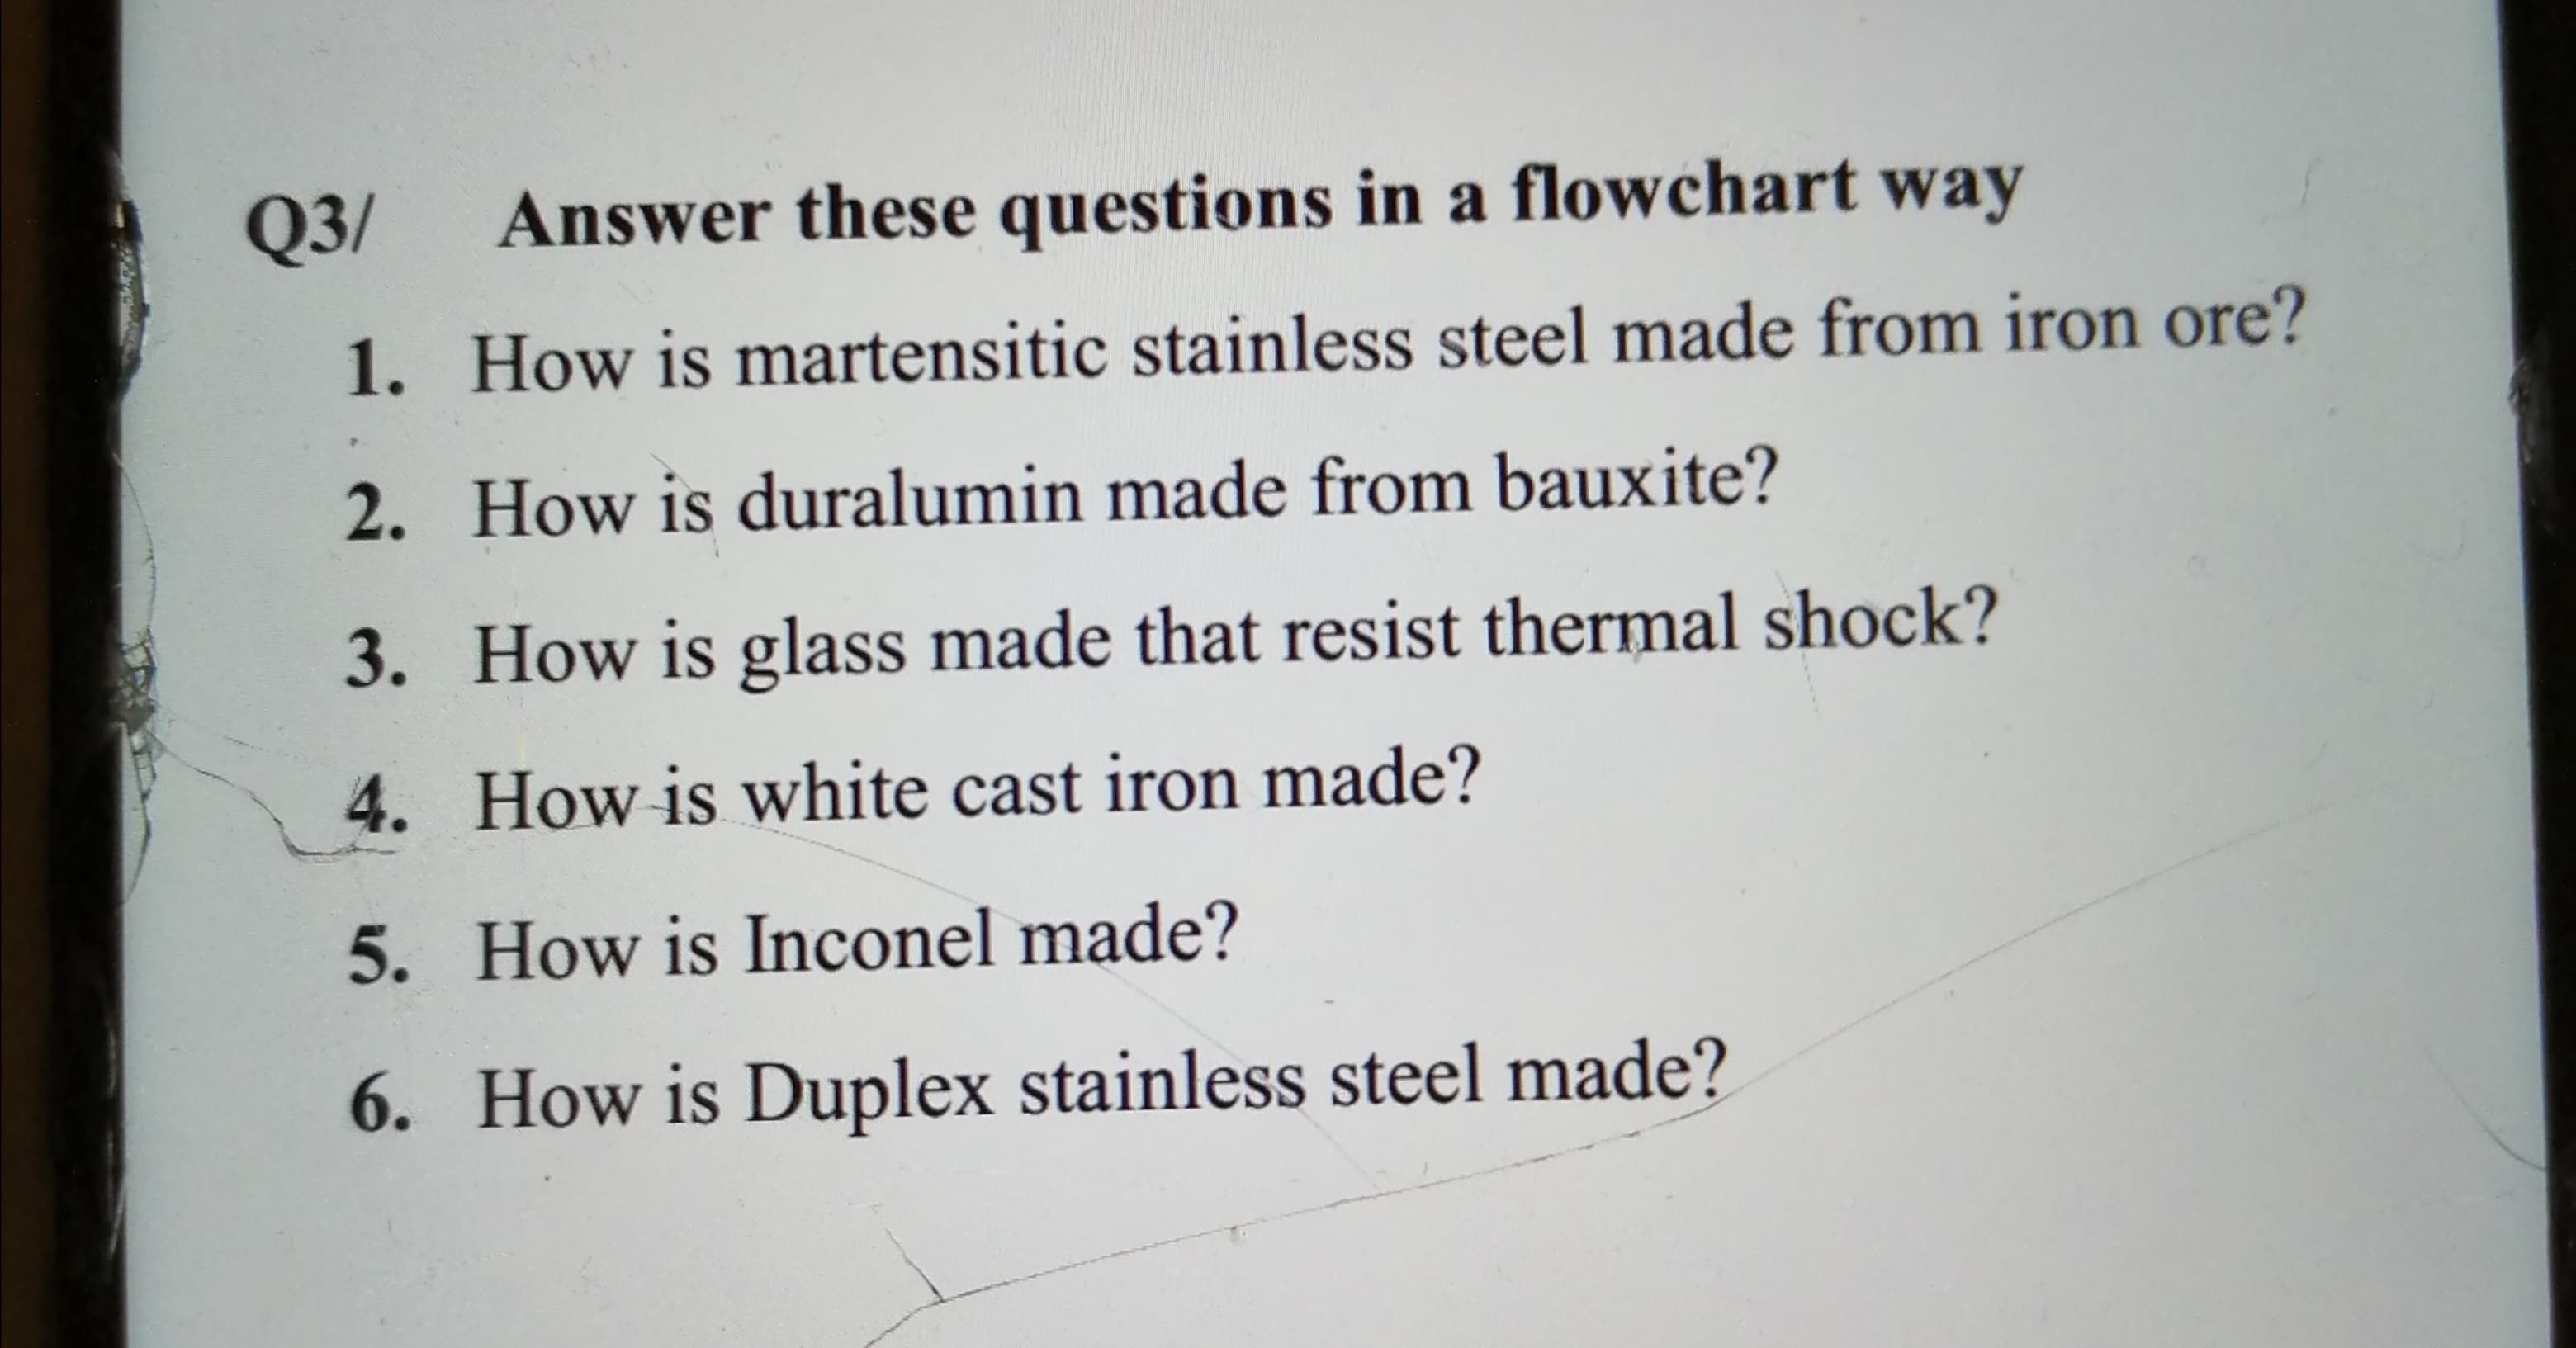 Q3/
Answer these questions in a flowchart way
1. How is martensitic stainless steel made from iron ore?
2. How is duralumin made from bauxite?
3. How is glass made that resist thermal shock?
